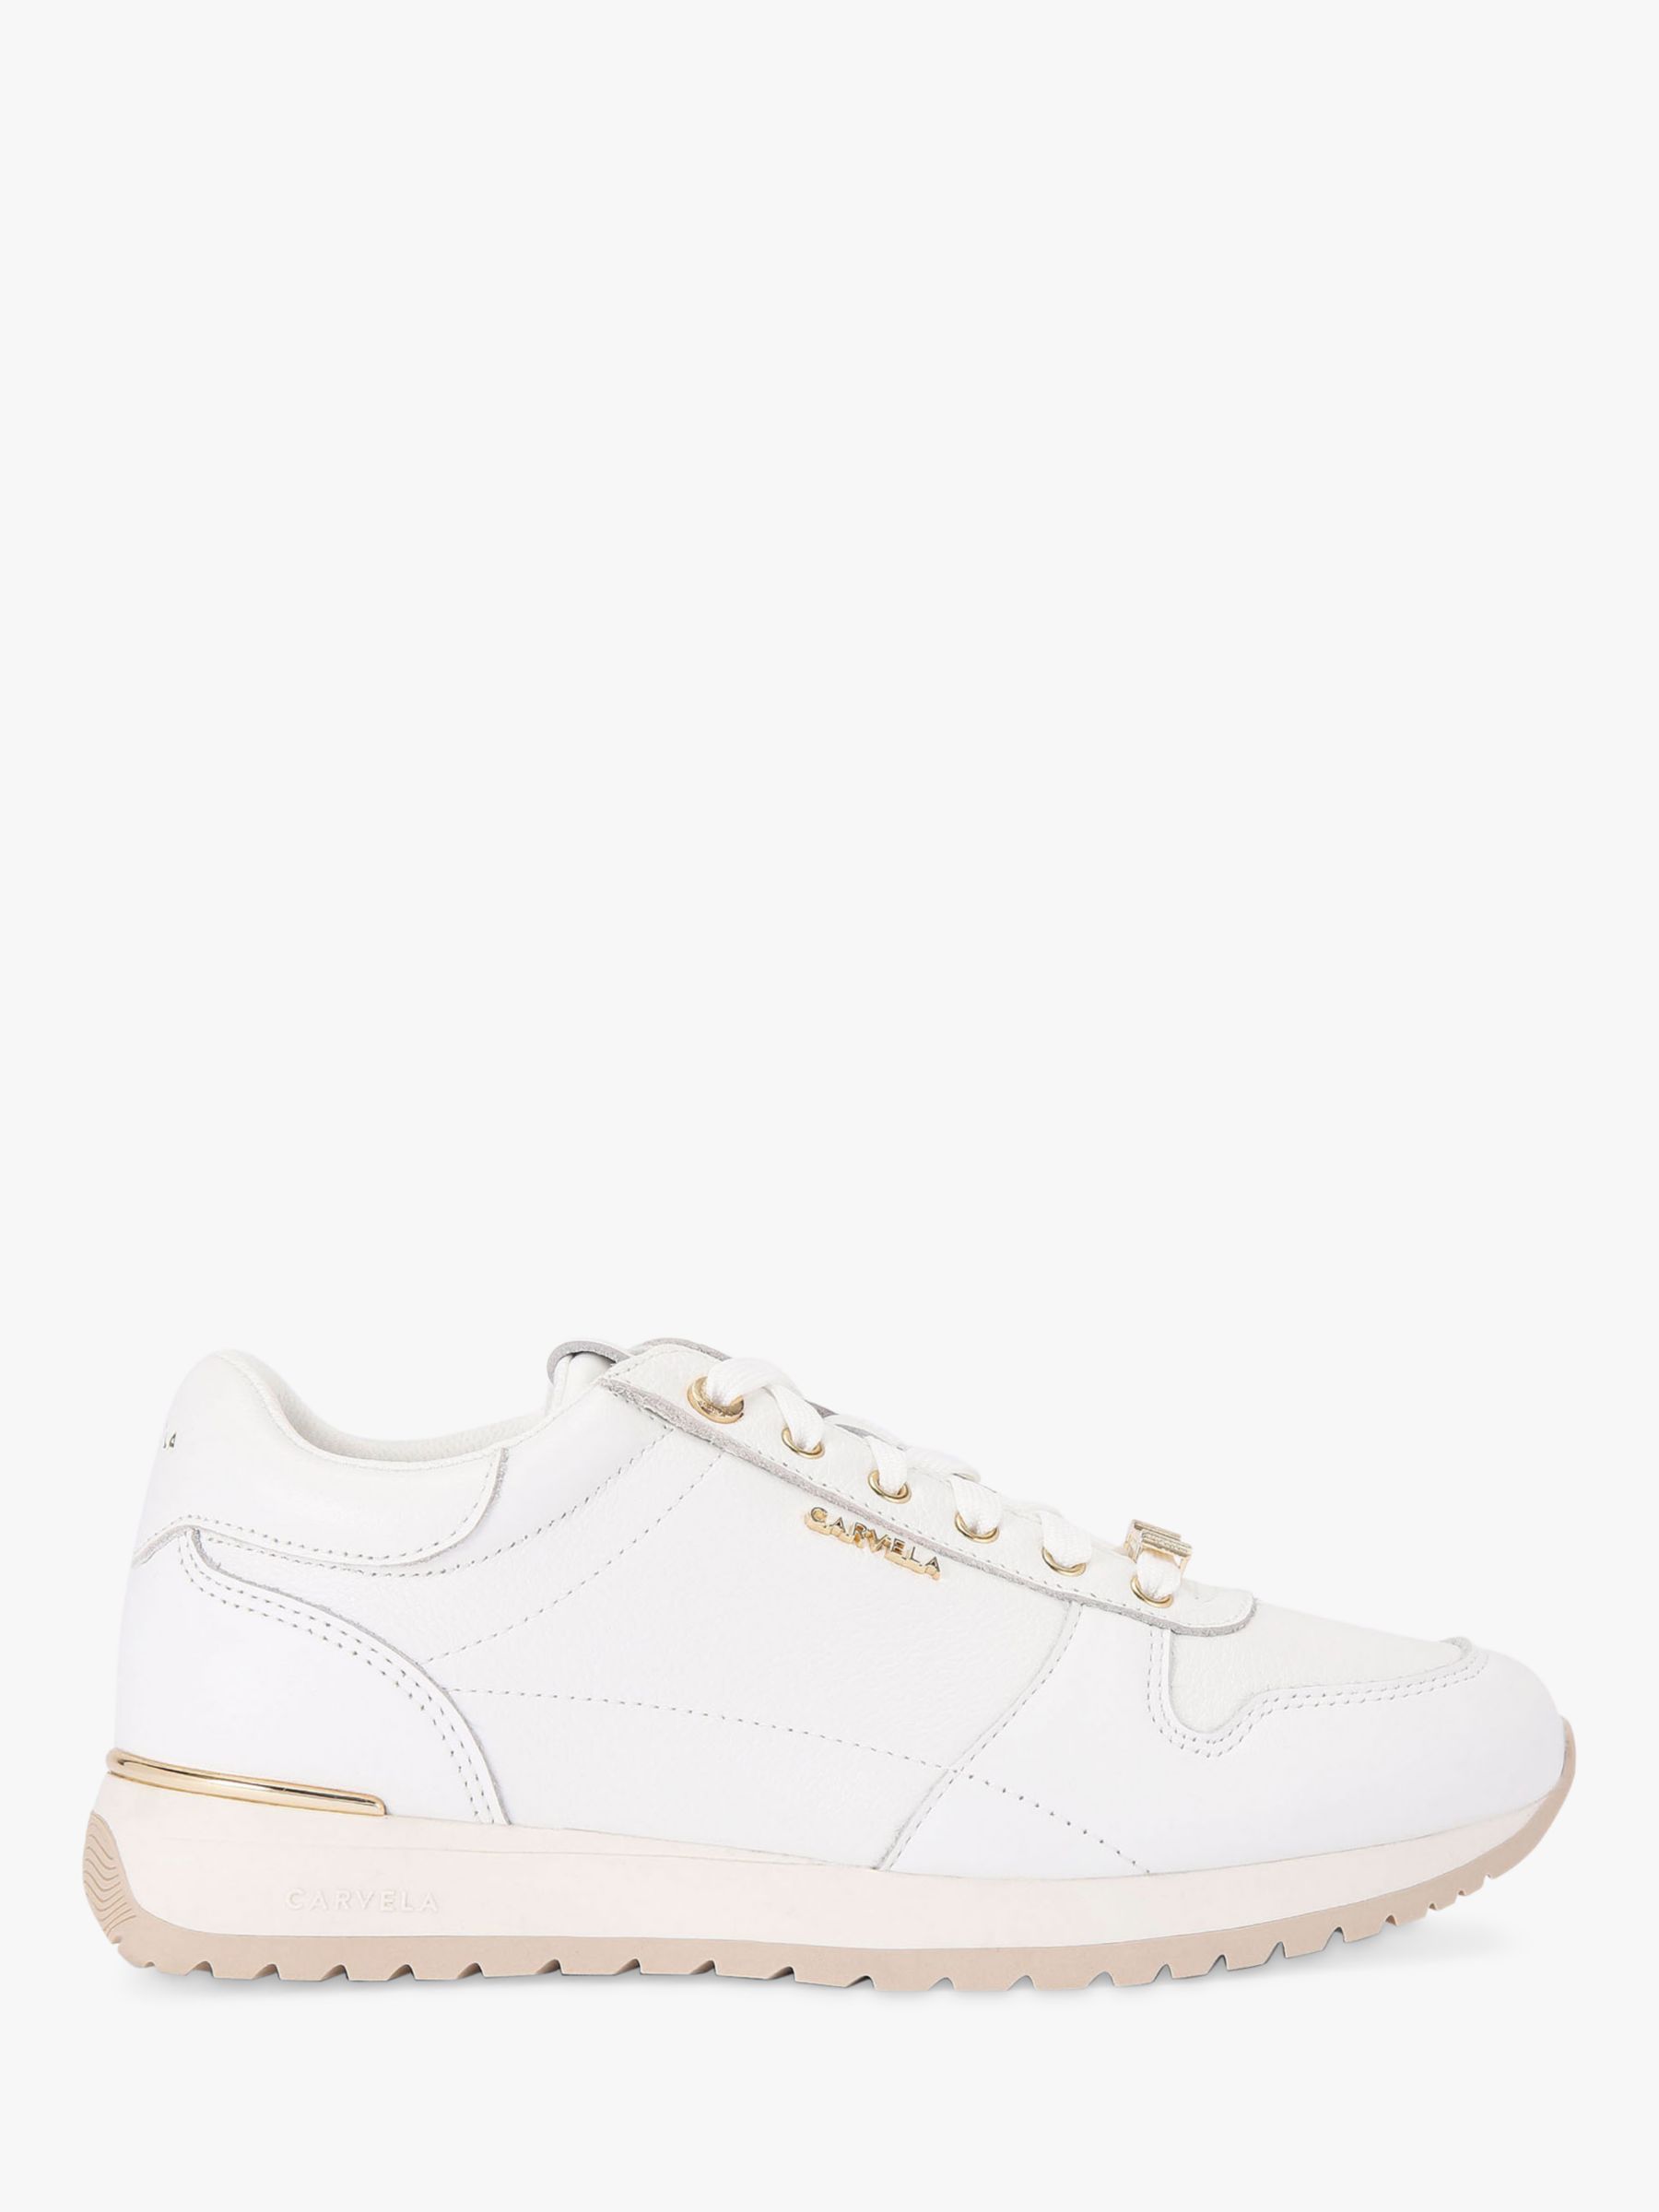 Carvela Track Star Trainers, White at John Lewis & Partners